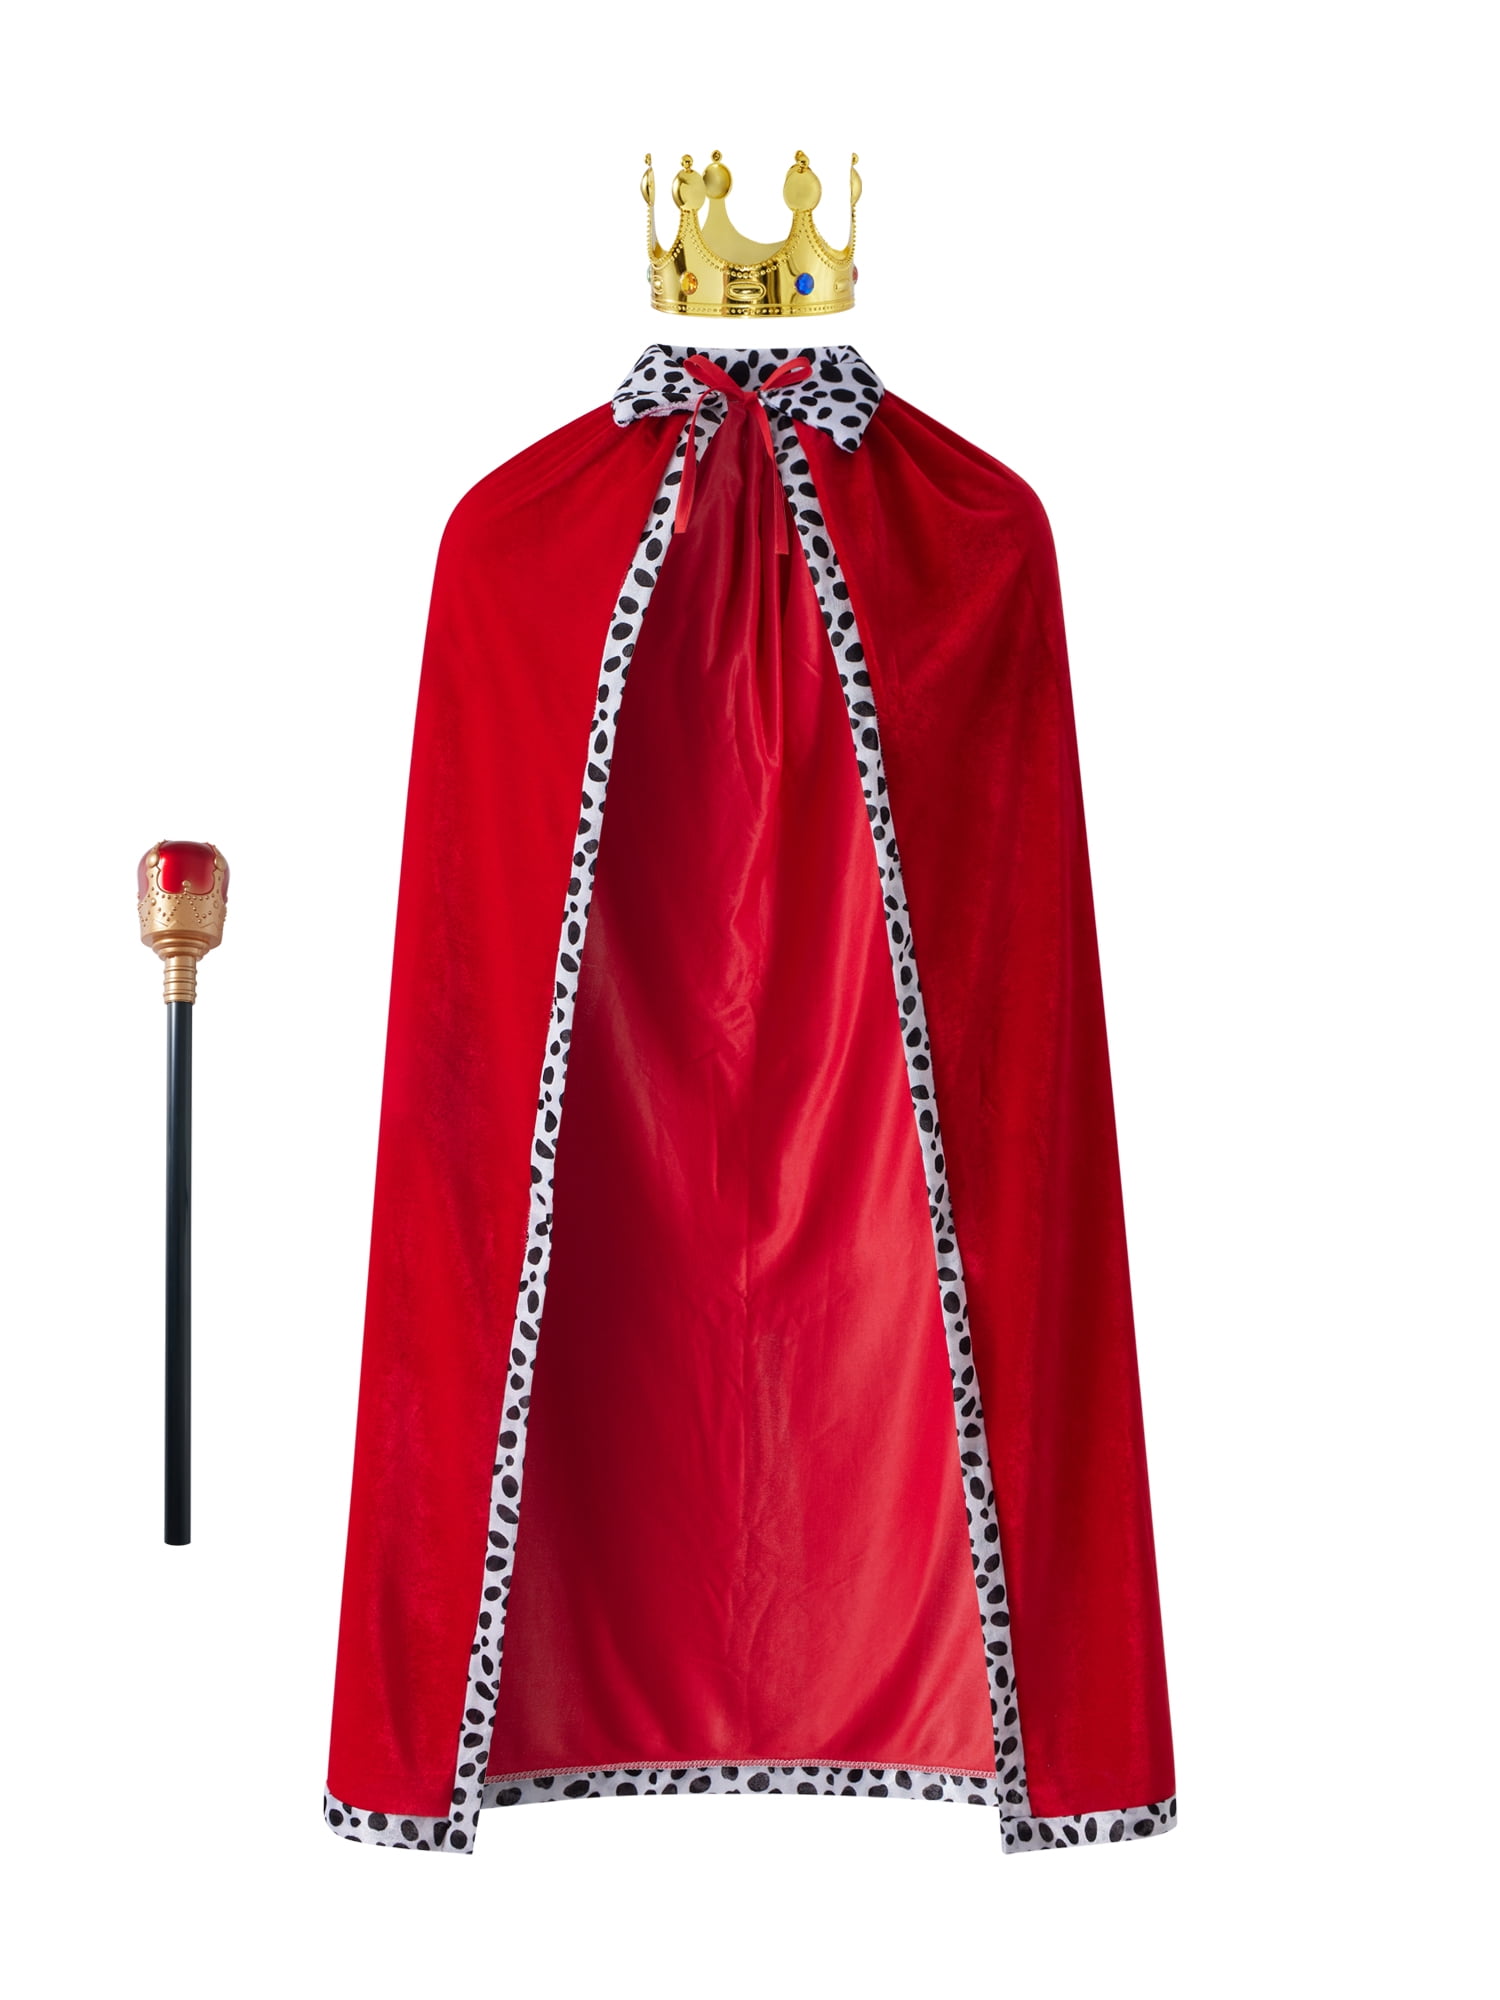 One Opening King Costume For Kids Robe Crown Scepter Set Boys Royal Prince  Cape Dress Up Cosplay - Walmart.Com